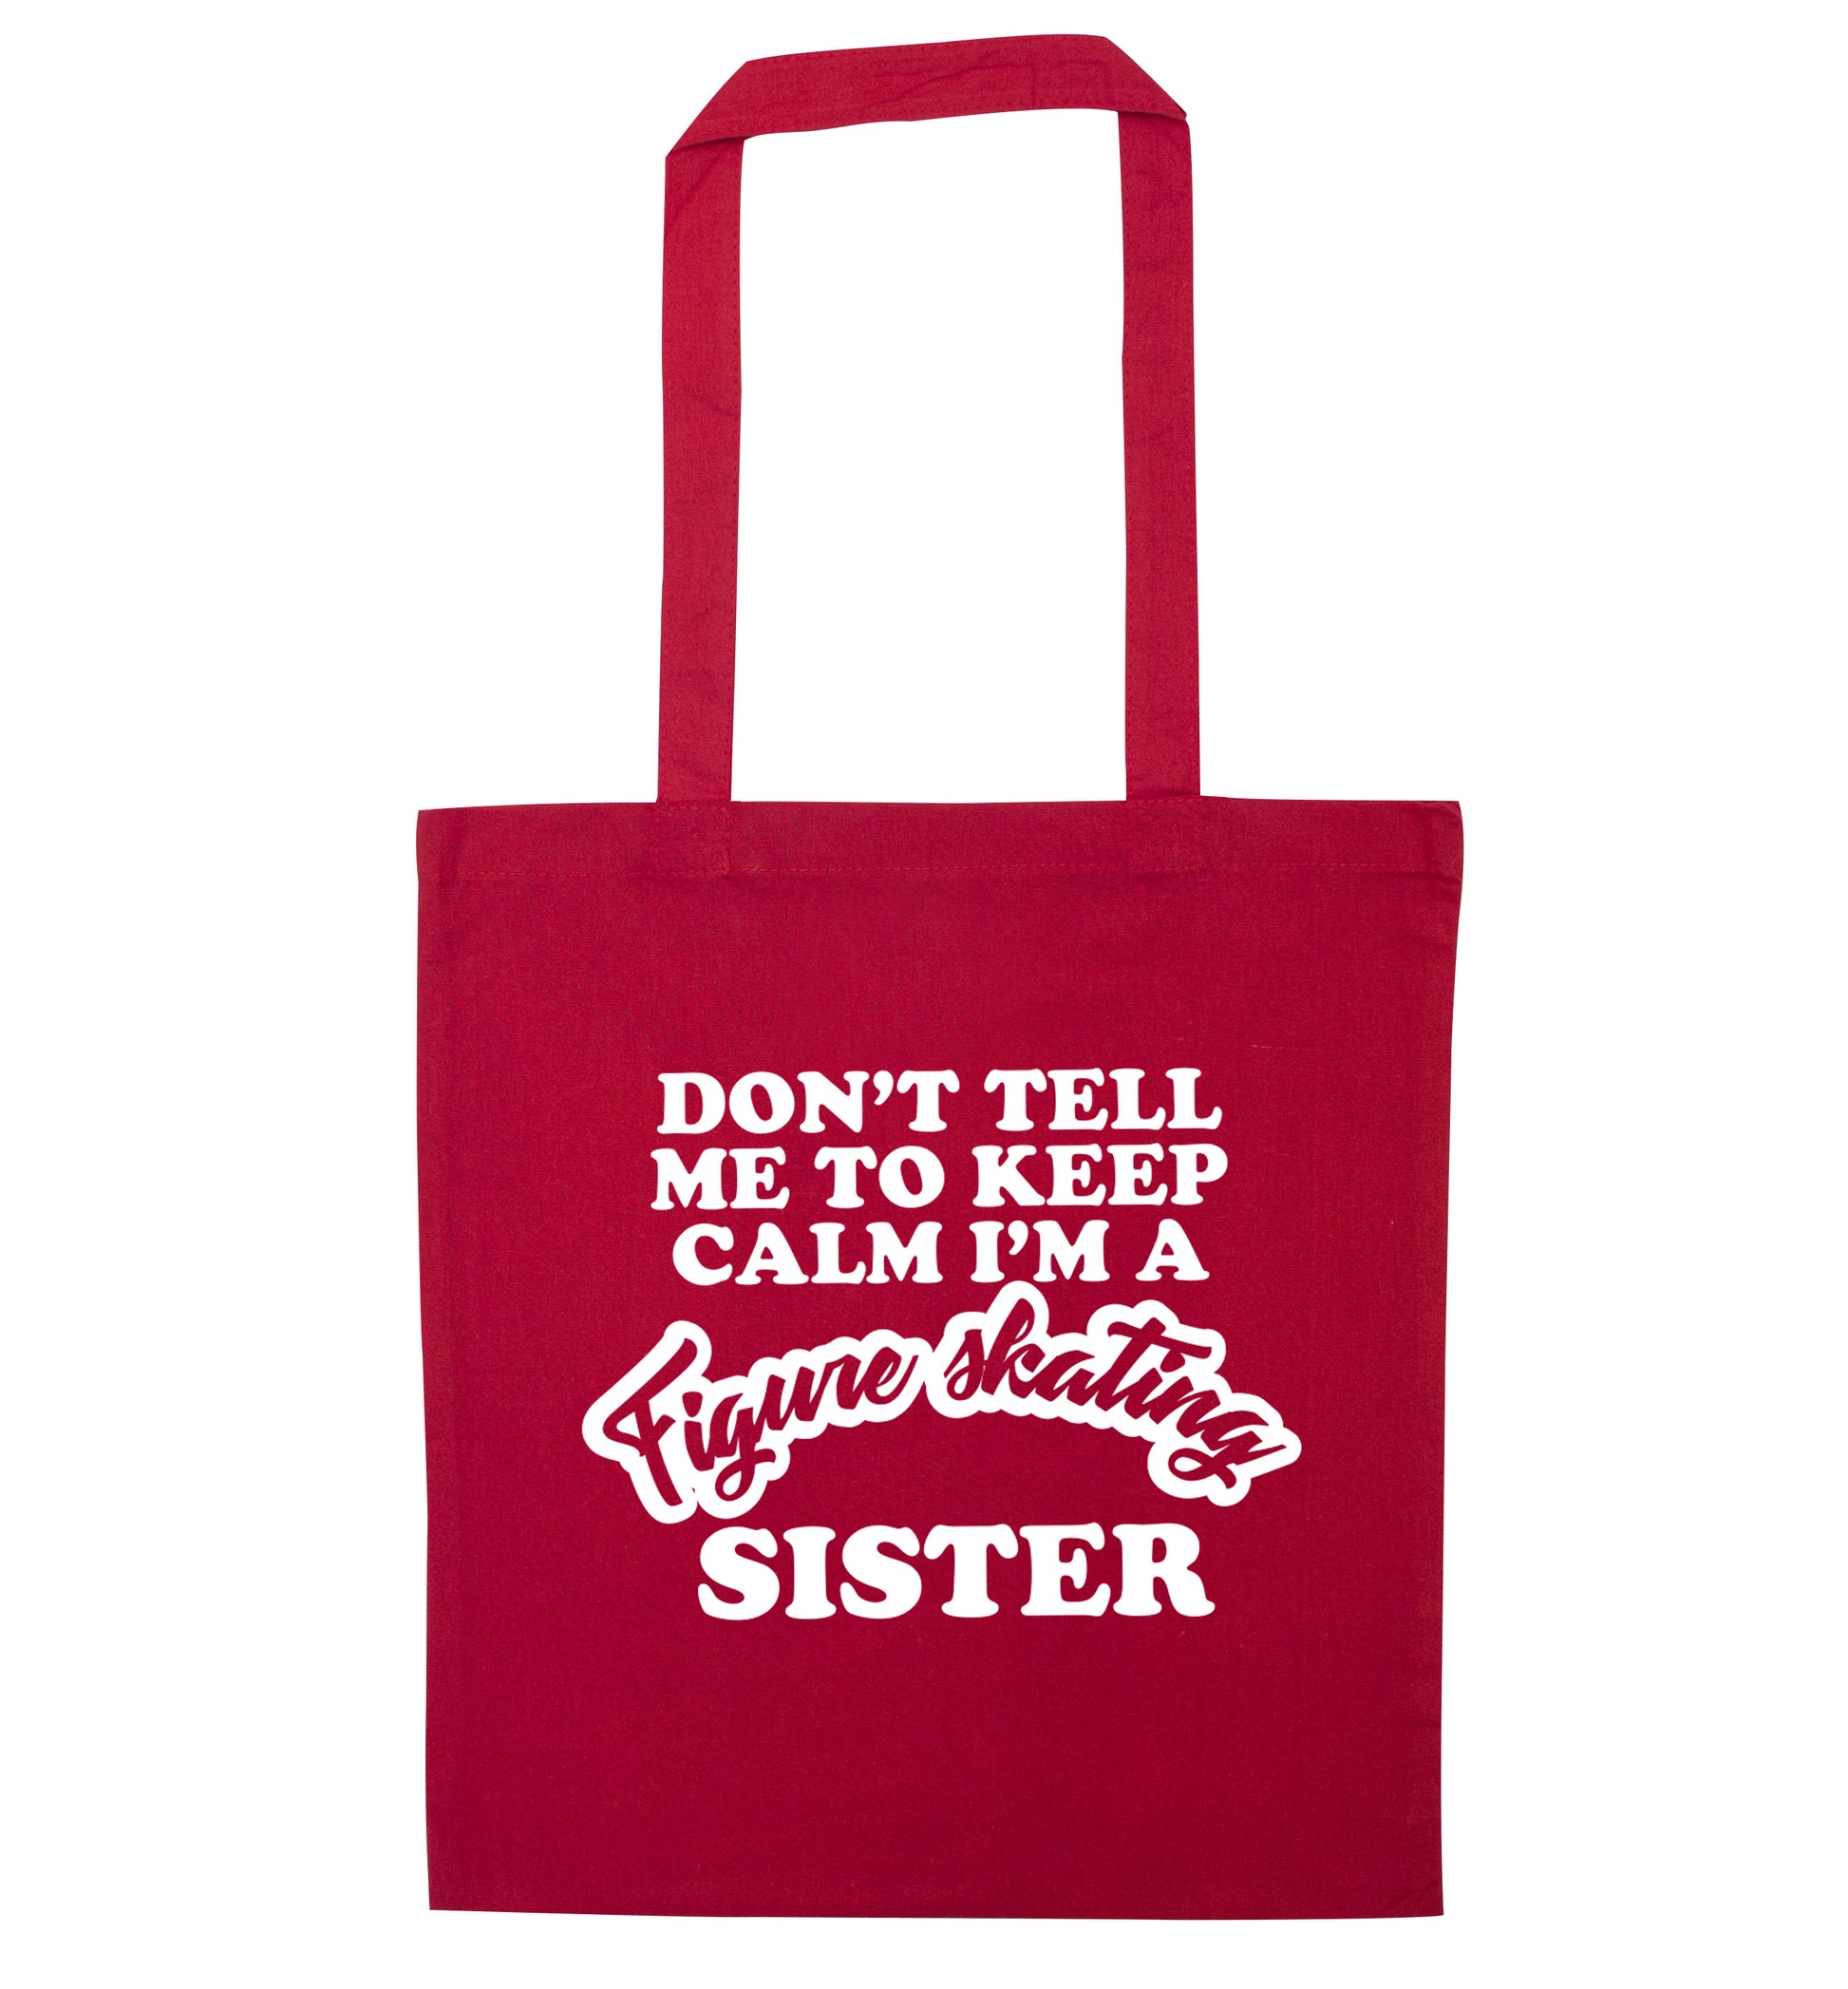 Don't tell me to keep calm I'm a figure skating sister red tote bag